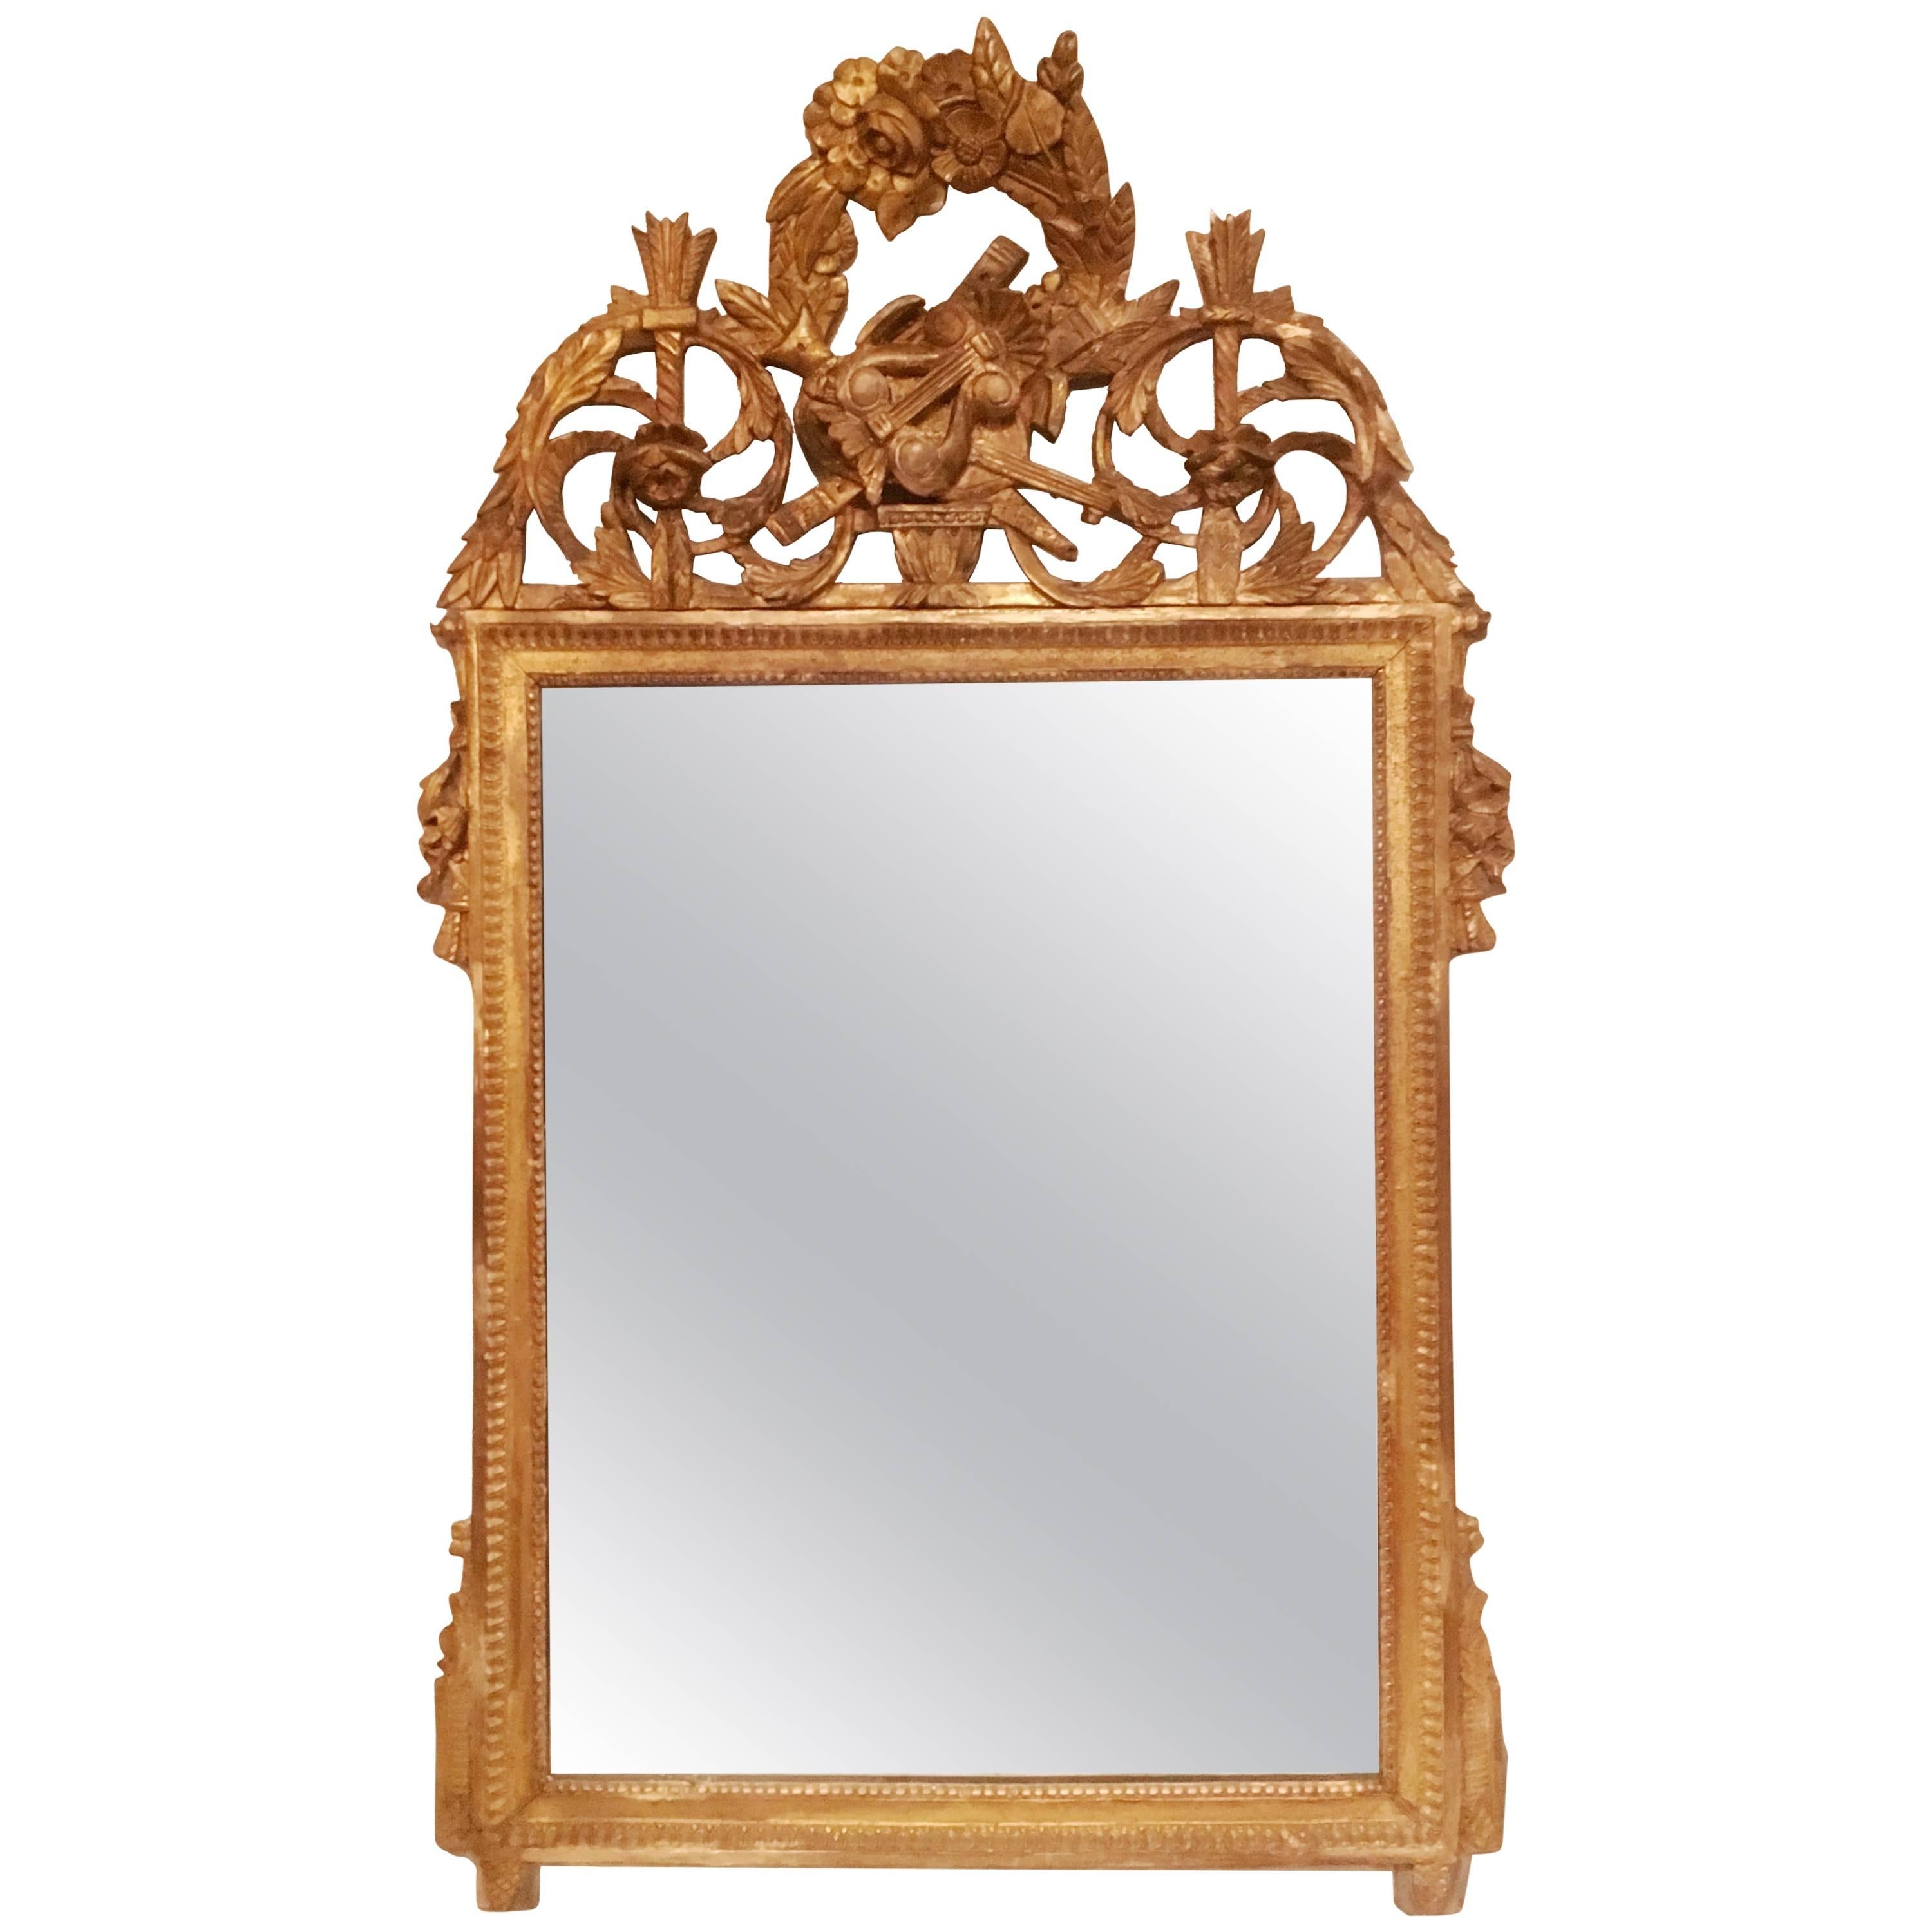 Late 18th Century French Neoclassical Giltwood Mirror Looking Glass with Crown